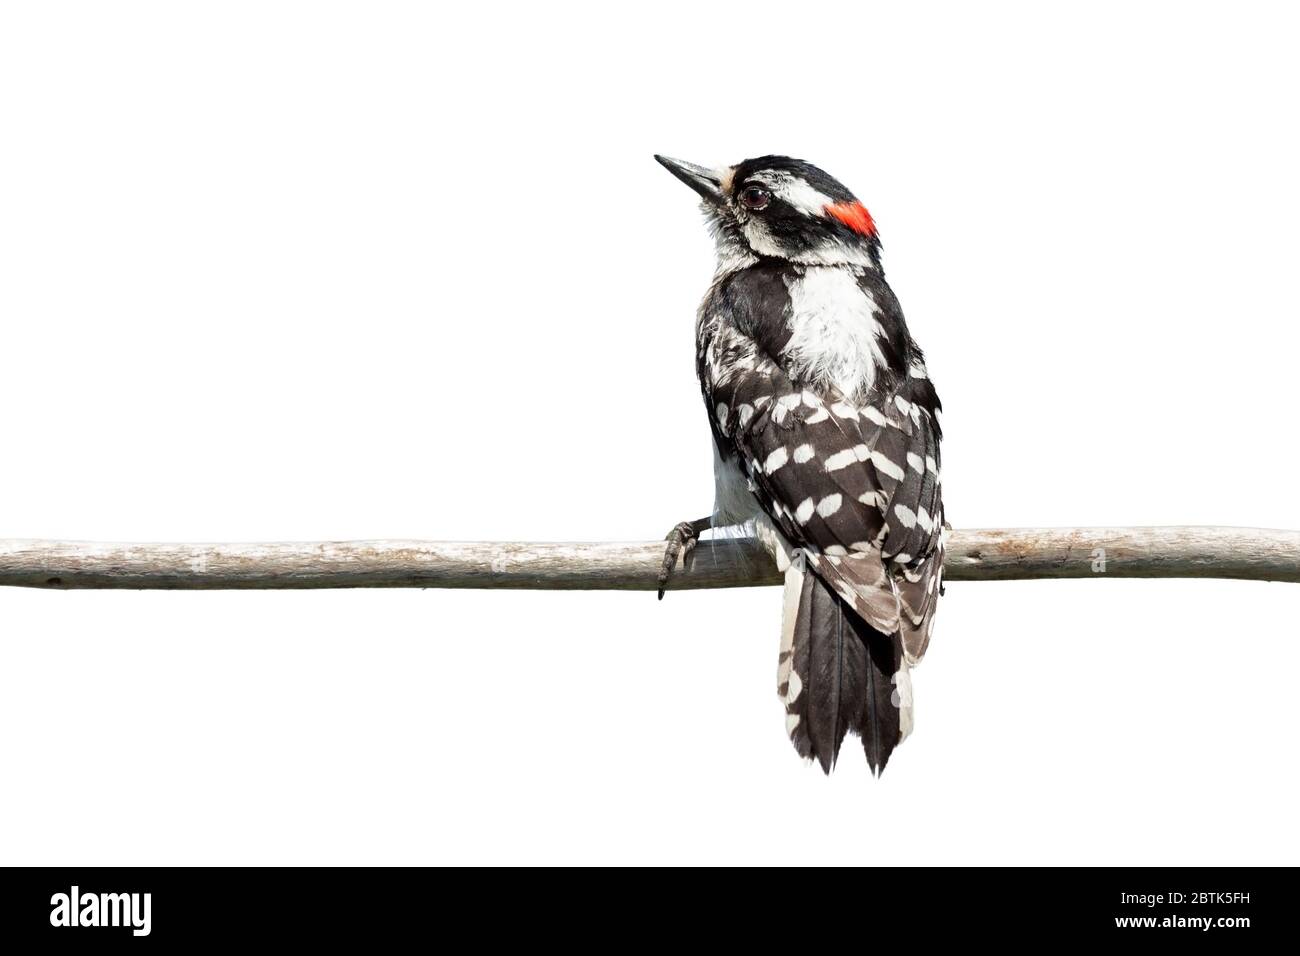 A backside view of a downy woodpecker as it clutches onto a branch. The red patch on its head glows against the barred white and black stripes of its Stock Photo